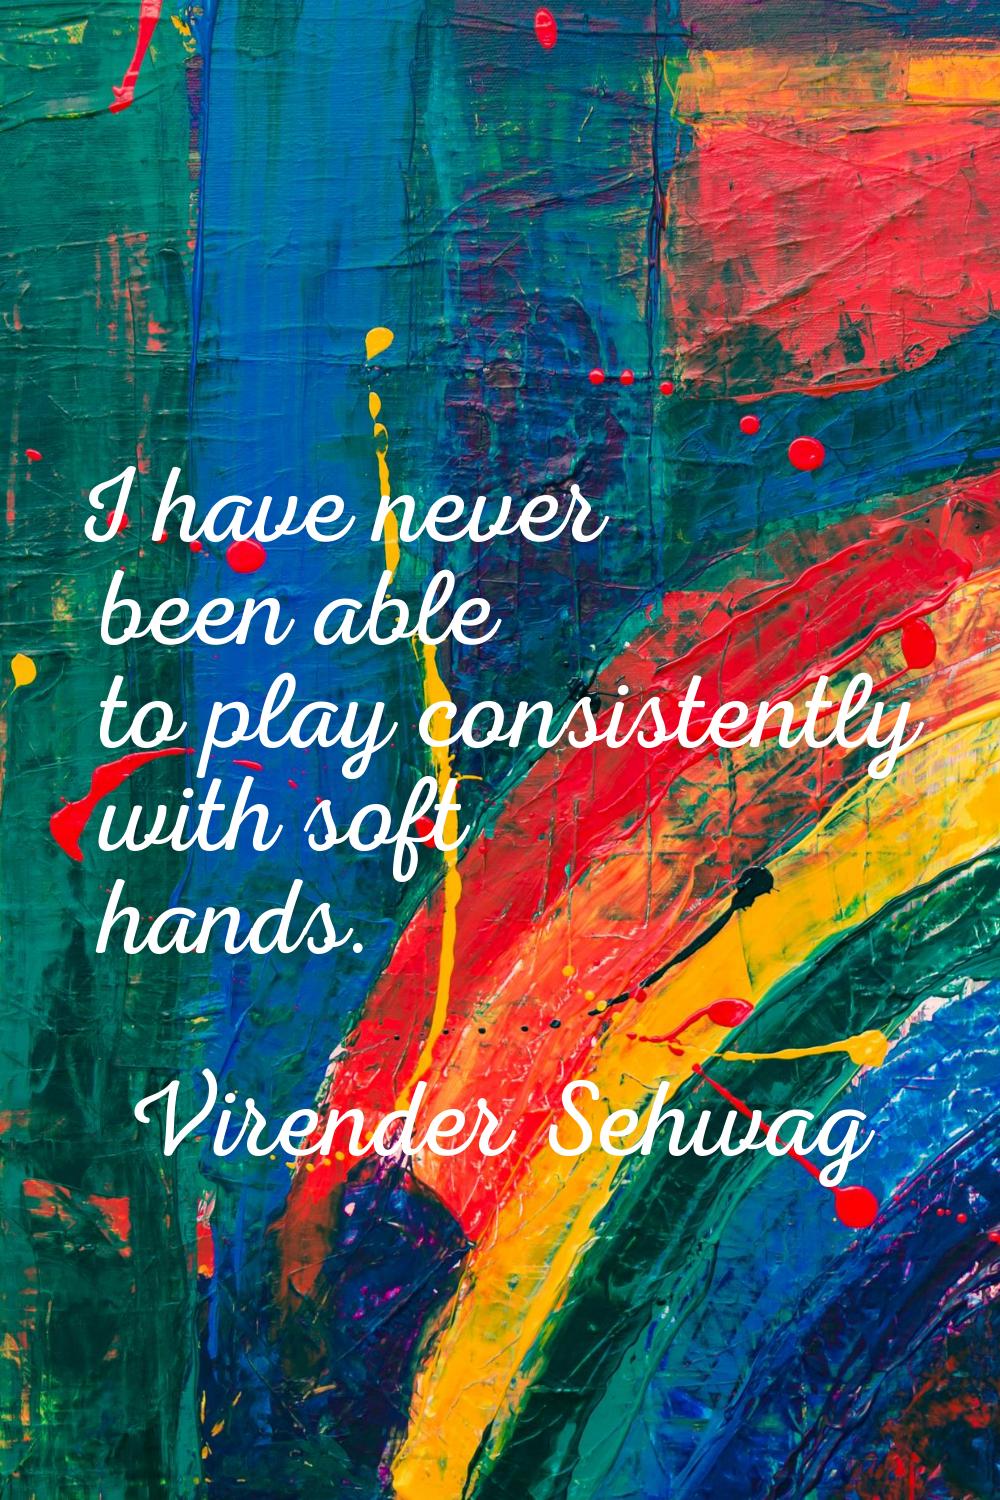 I have never been able to play consistently with soft hands.